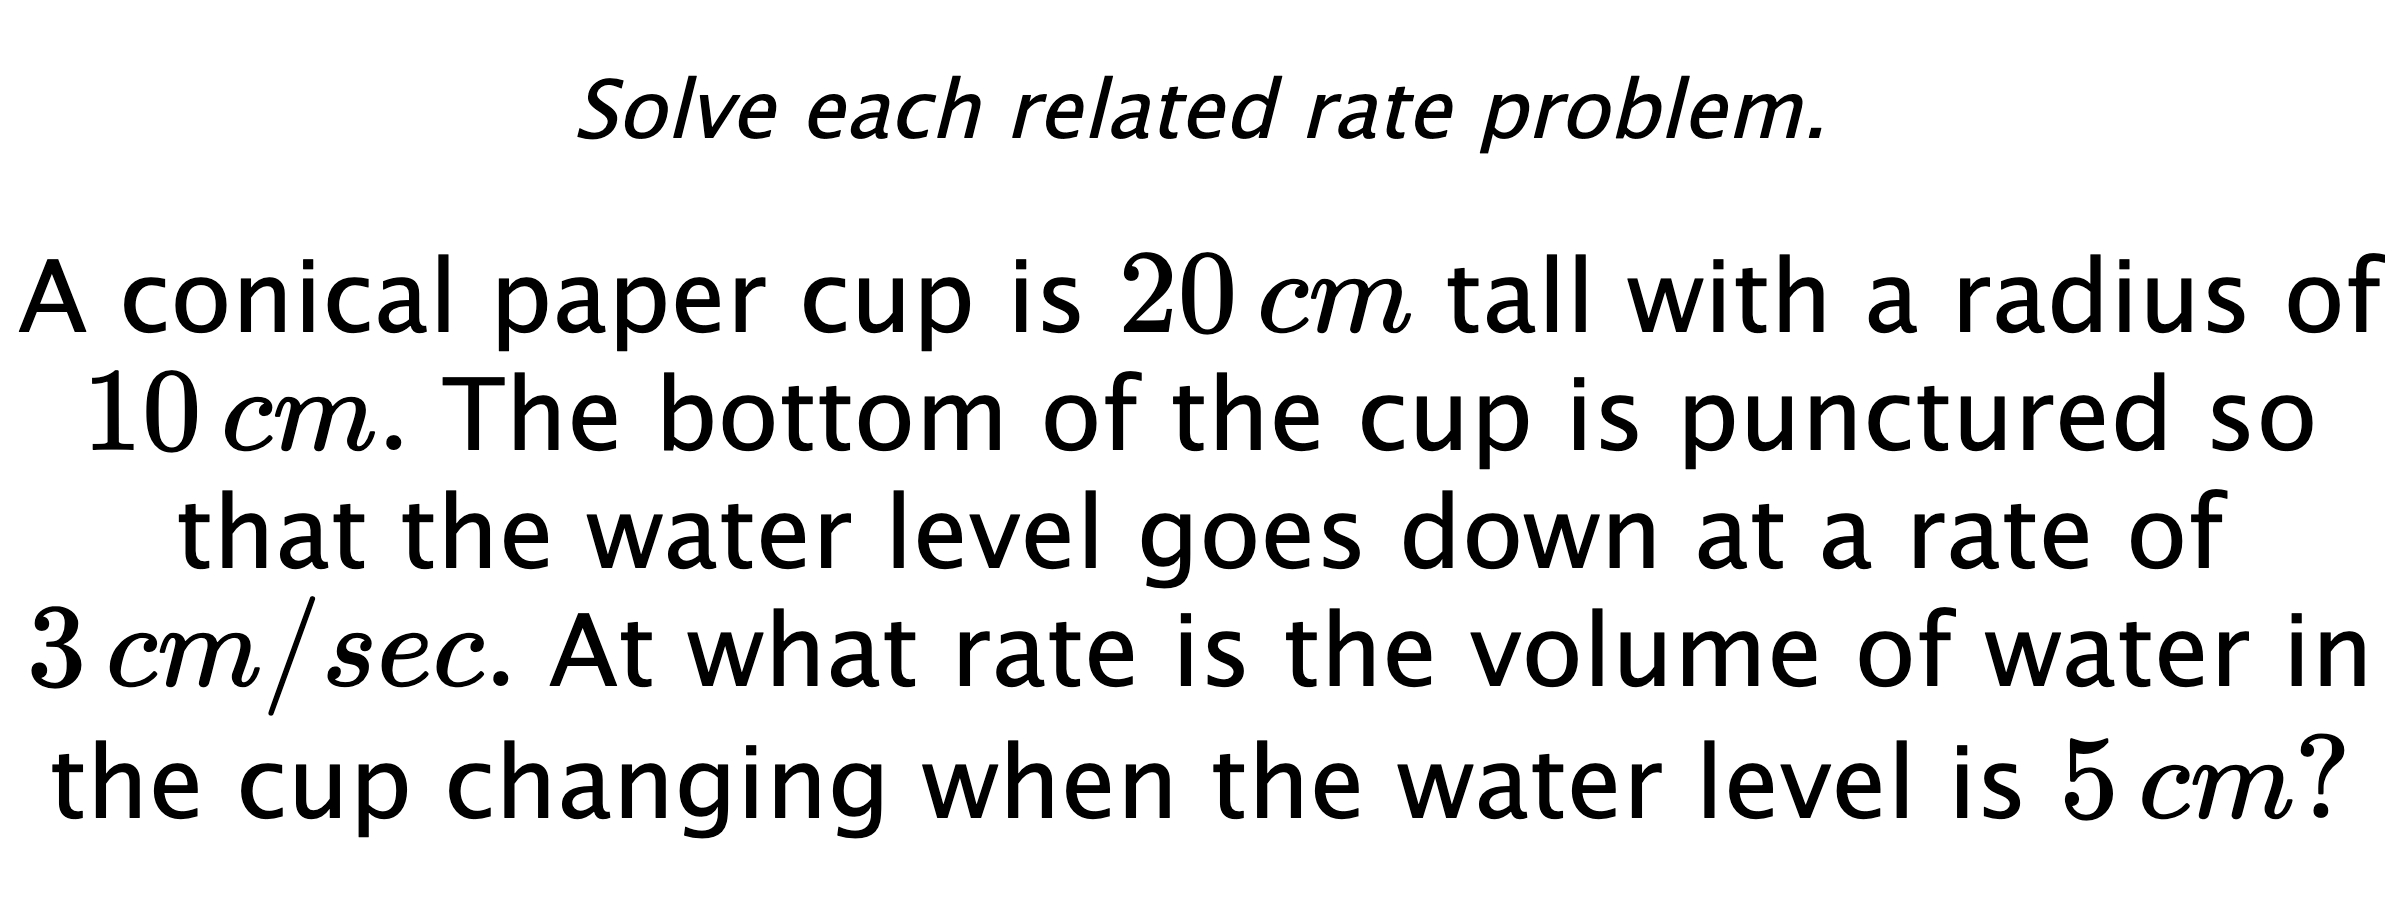 Solve each related rate problem. A conical paper cup is $20\,cm$ tall with a radius of $10\,cm.$ The bottom of the cup is punctured so that the water level goes down at a rate of $3\,cm/sec.$ At what rate is the volume of water in the cup changing when the water level is $5\,cm?$